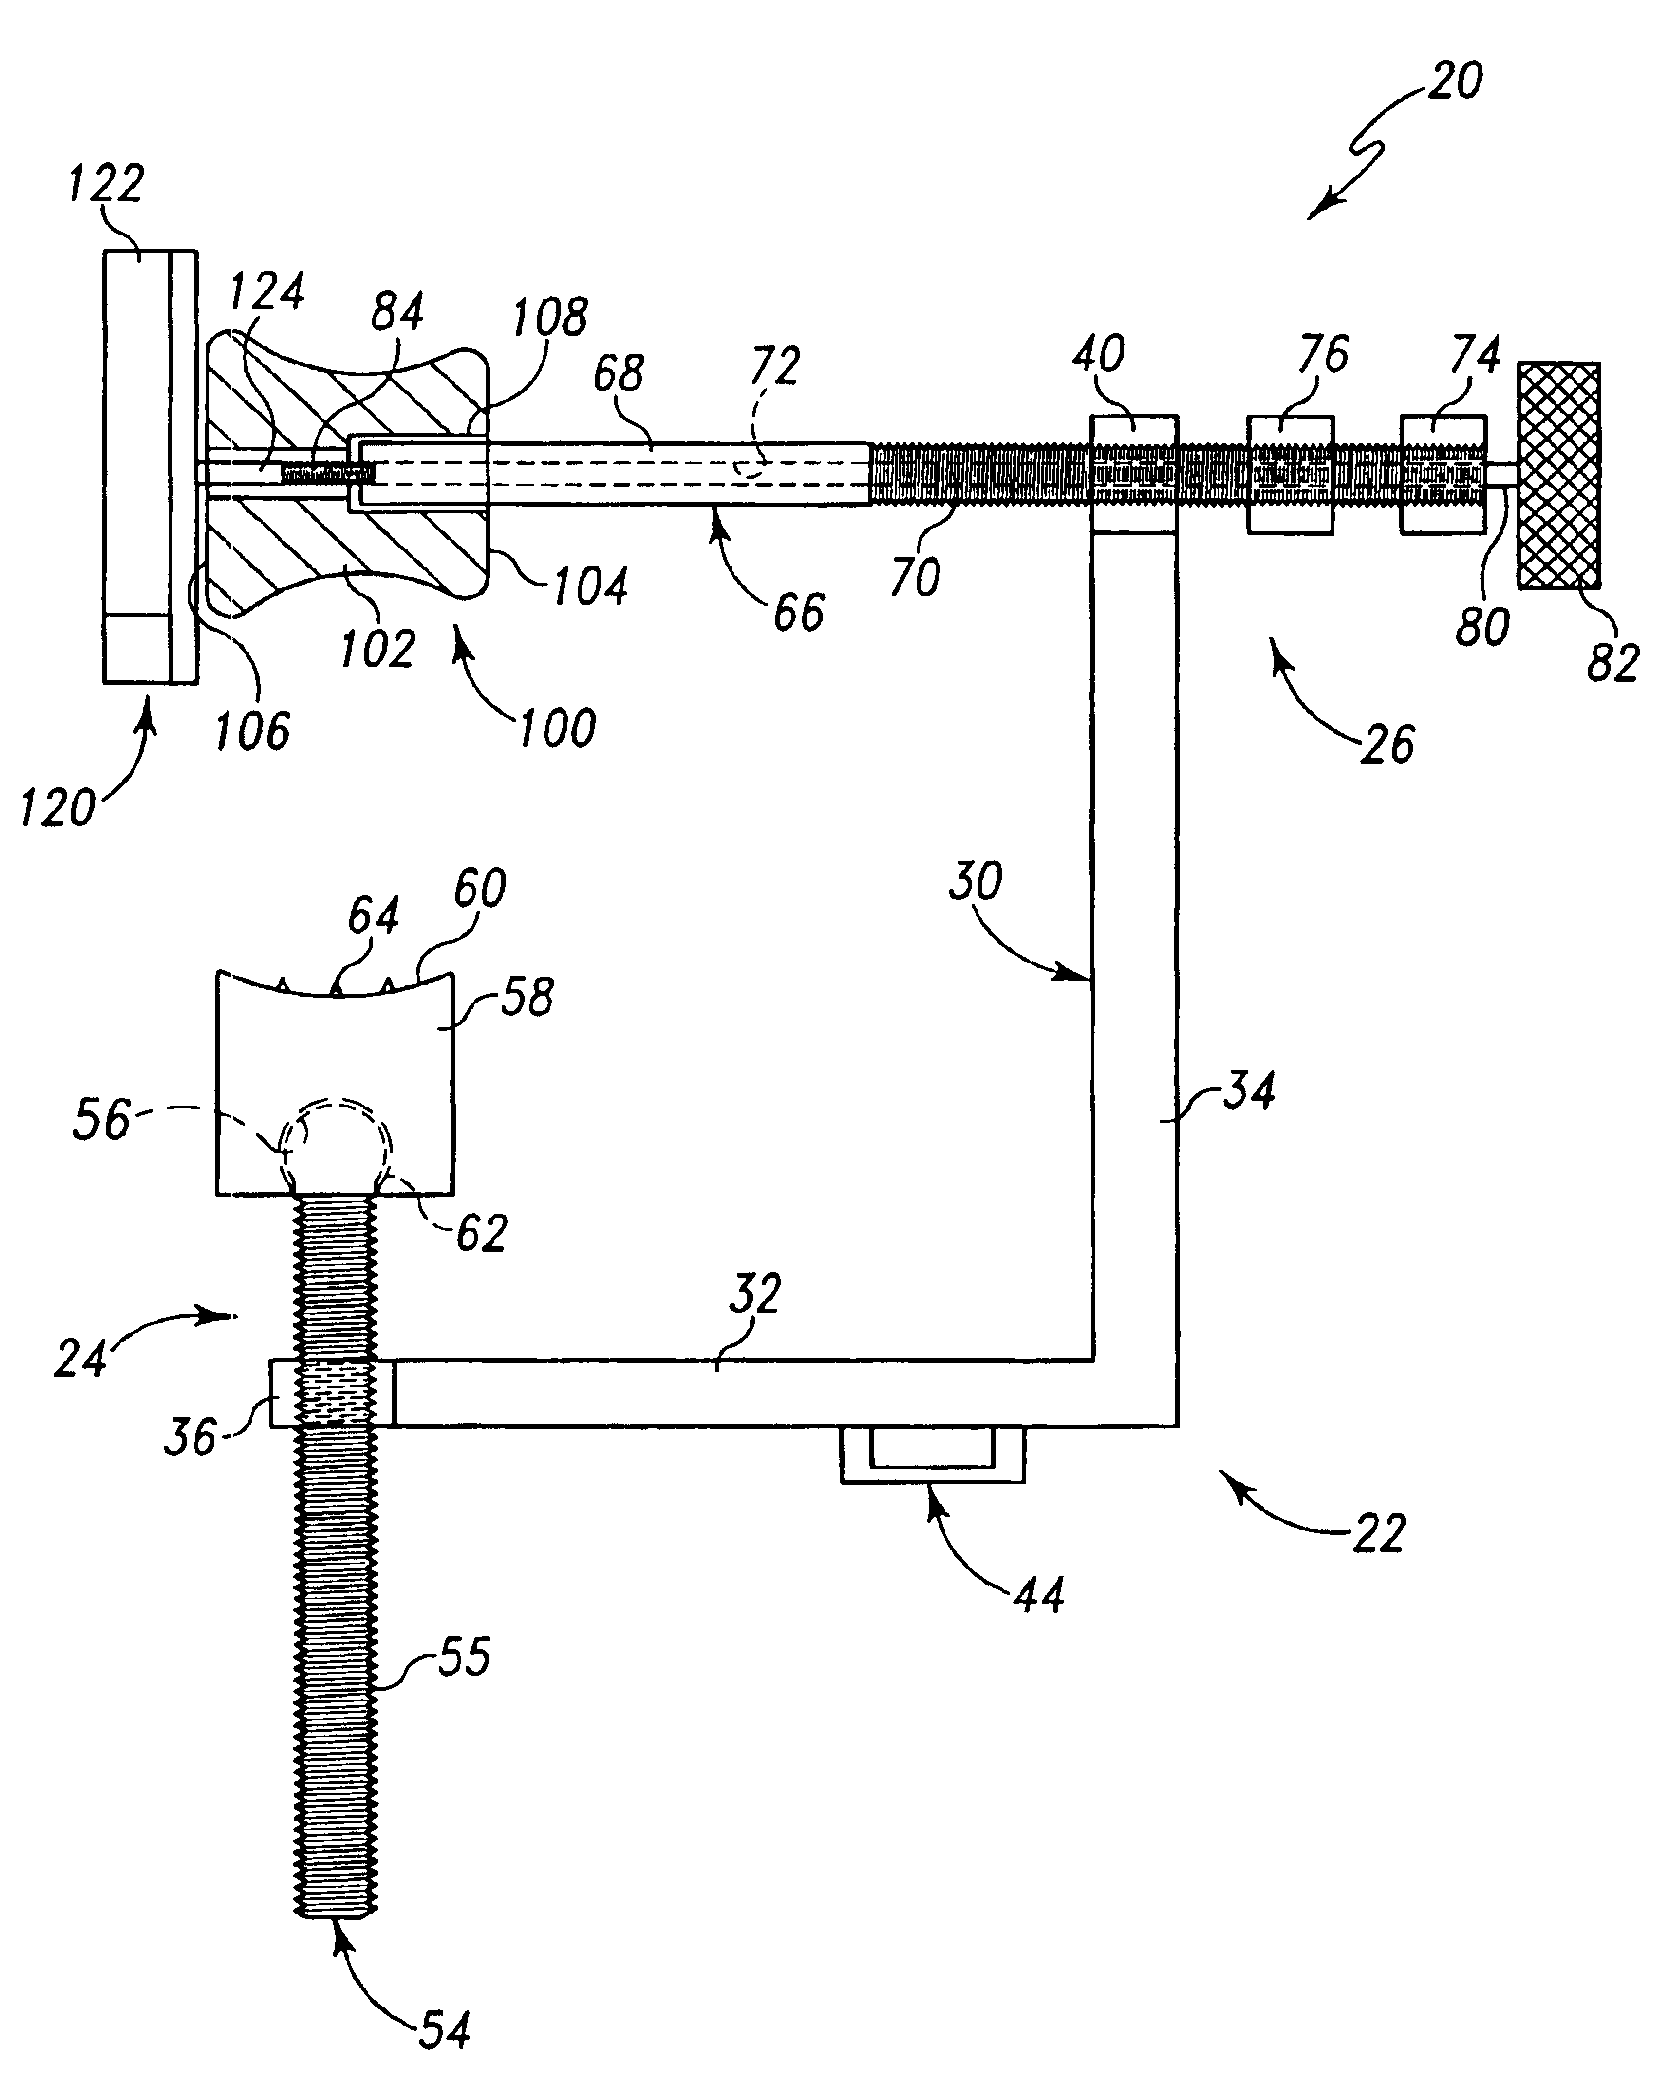 Method and apparatus for resecting bone from an ulna in preparation for prosthetic implantation